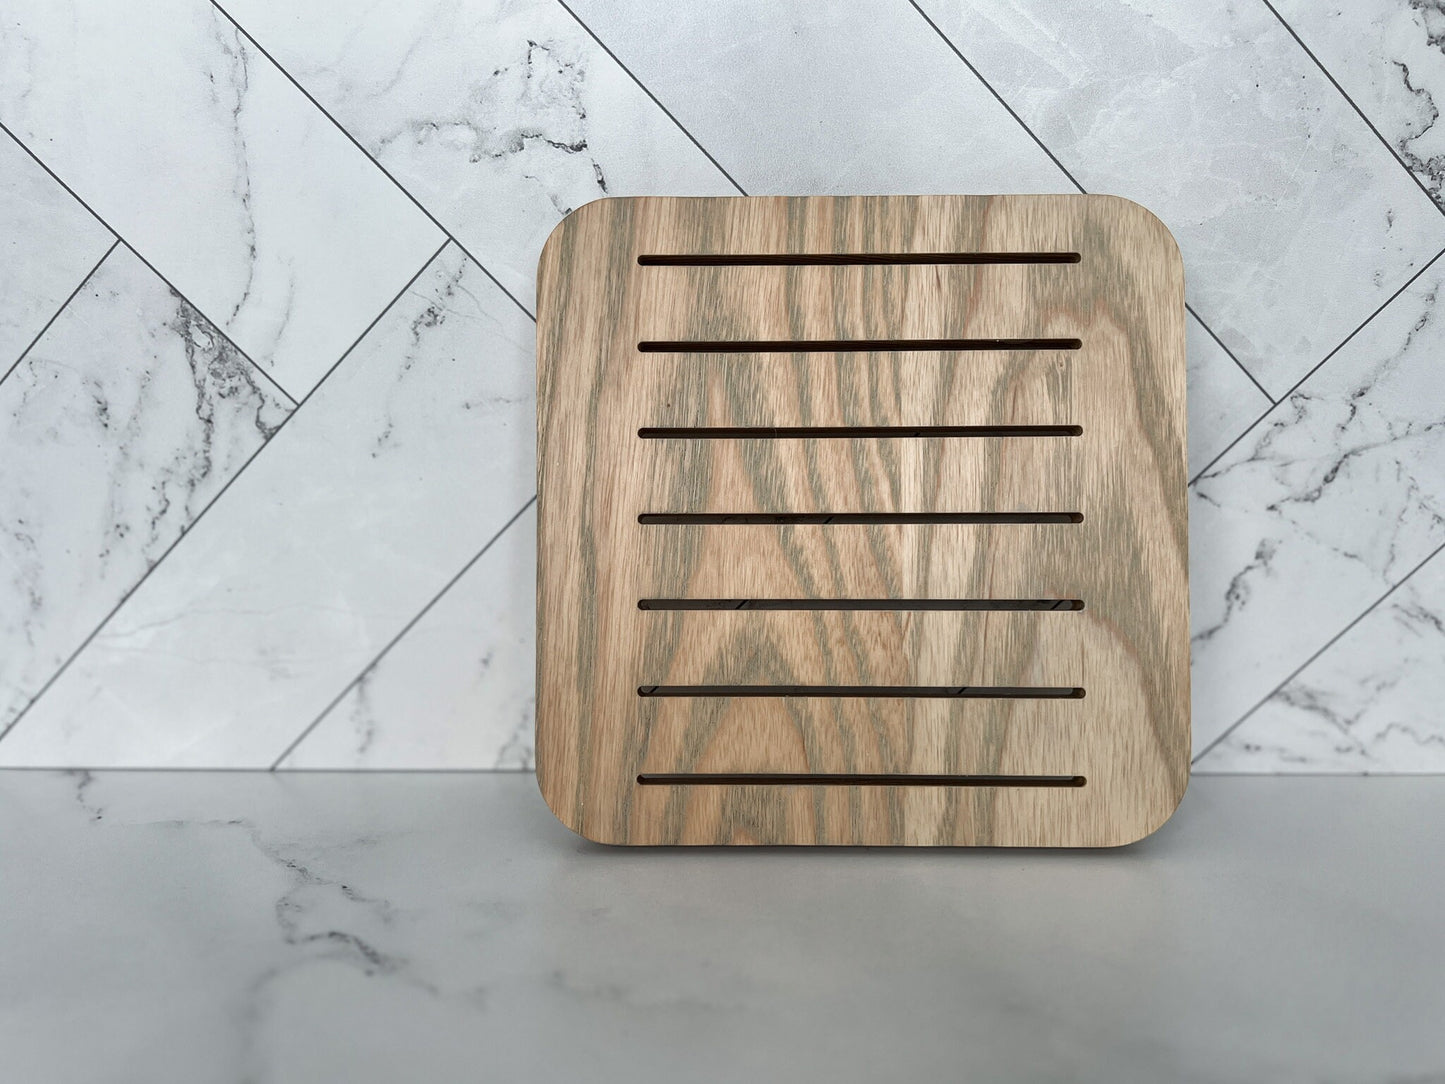 Standard Wooden Trivet, Serving Tray, Wood Trivet for Dining Table, Dining Accessories, Wood Gifts, Hot Tray, Pot Holder